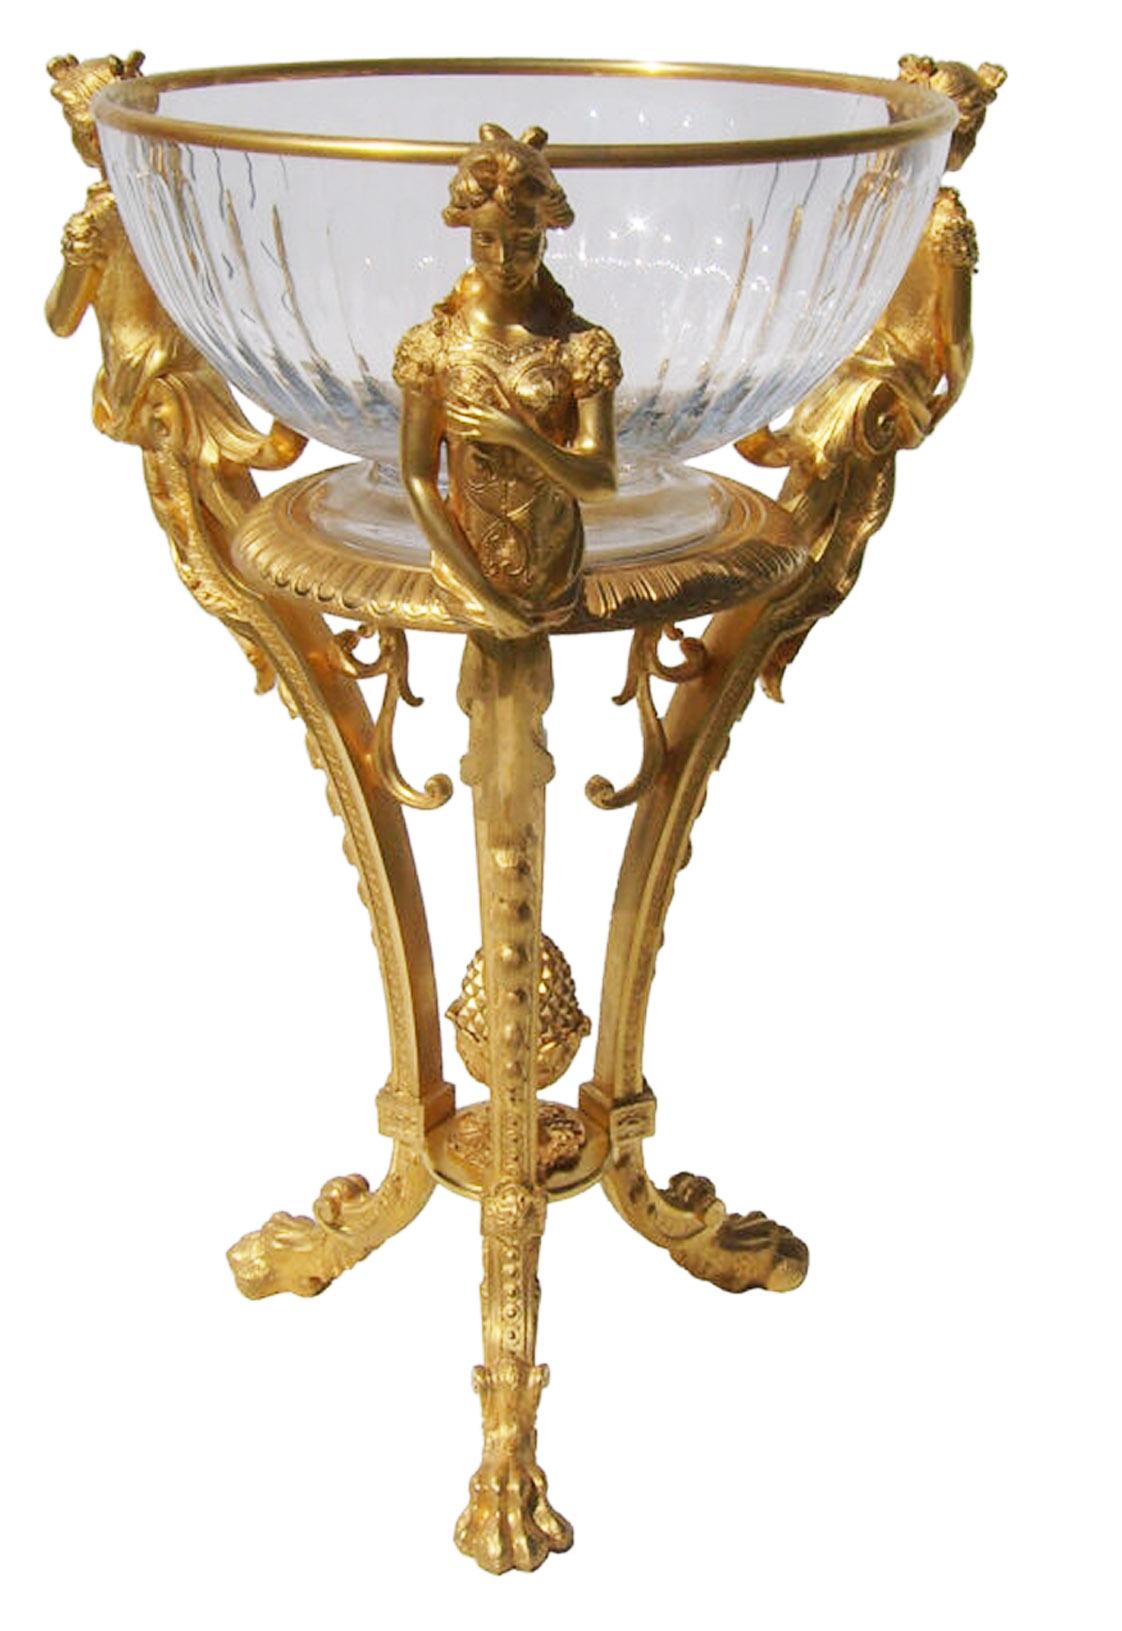 Pair of French Neoclassical Style Ormolu & Crystal Jardinieres For Sale 3